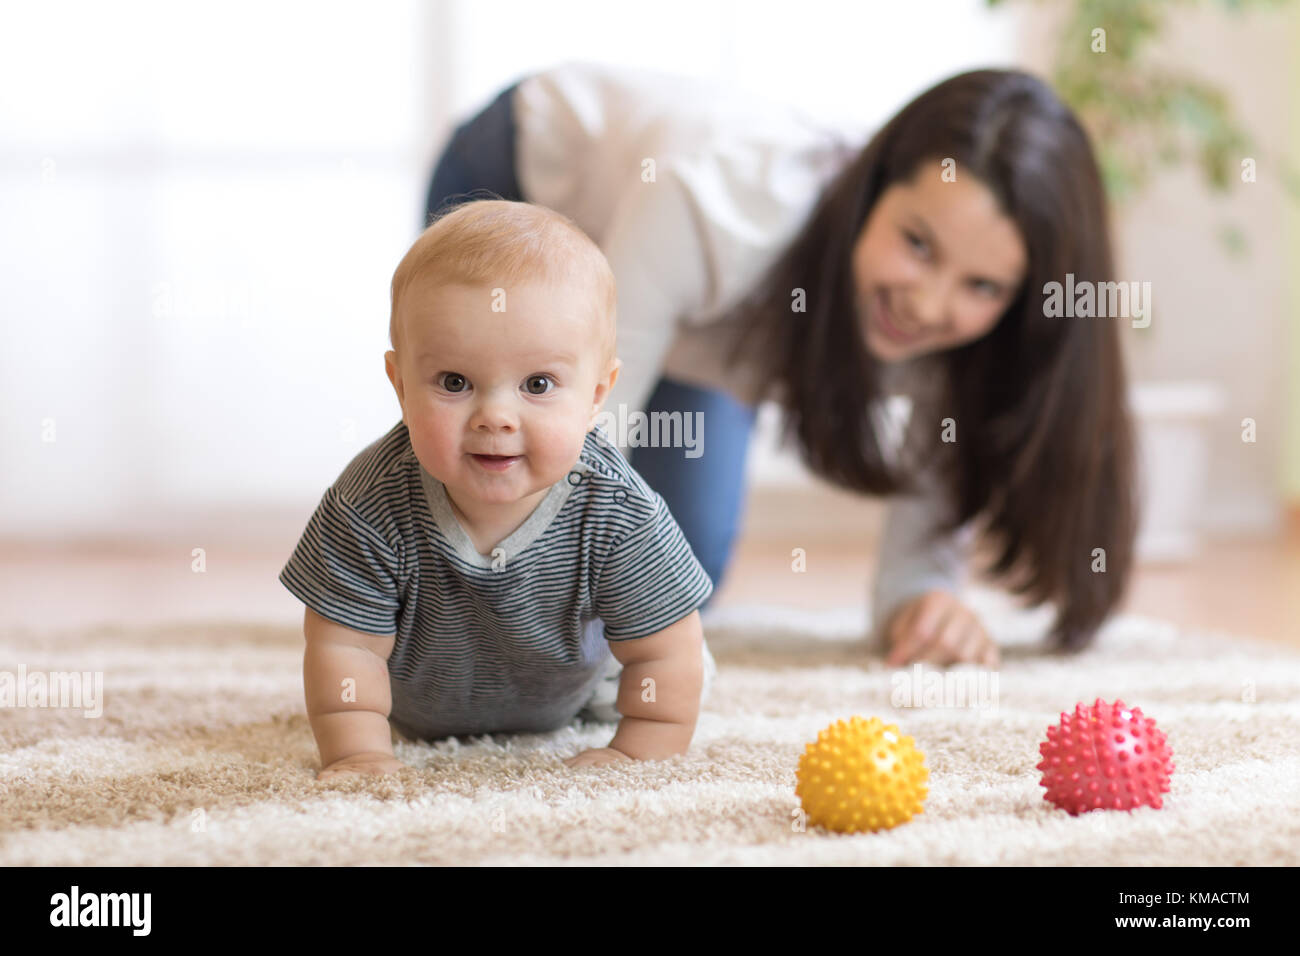 Funny baby crawling with mother Banque D'Images